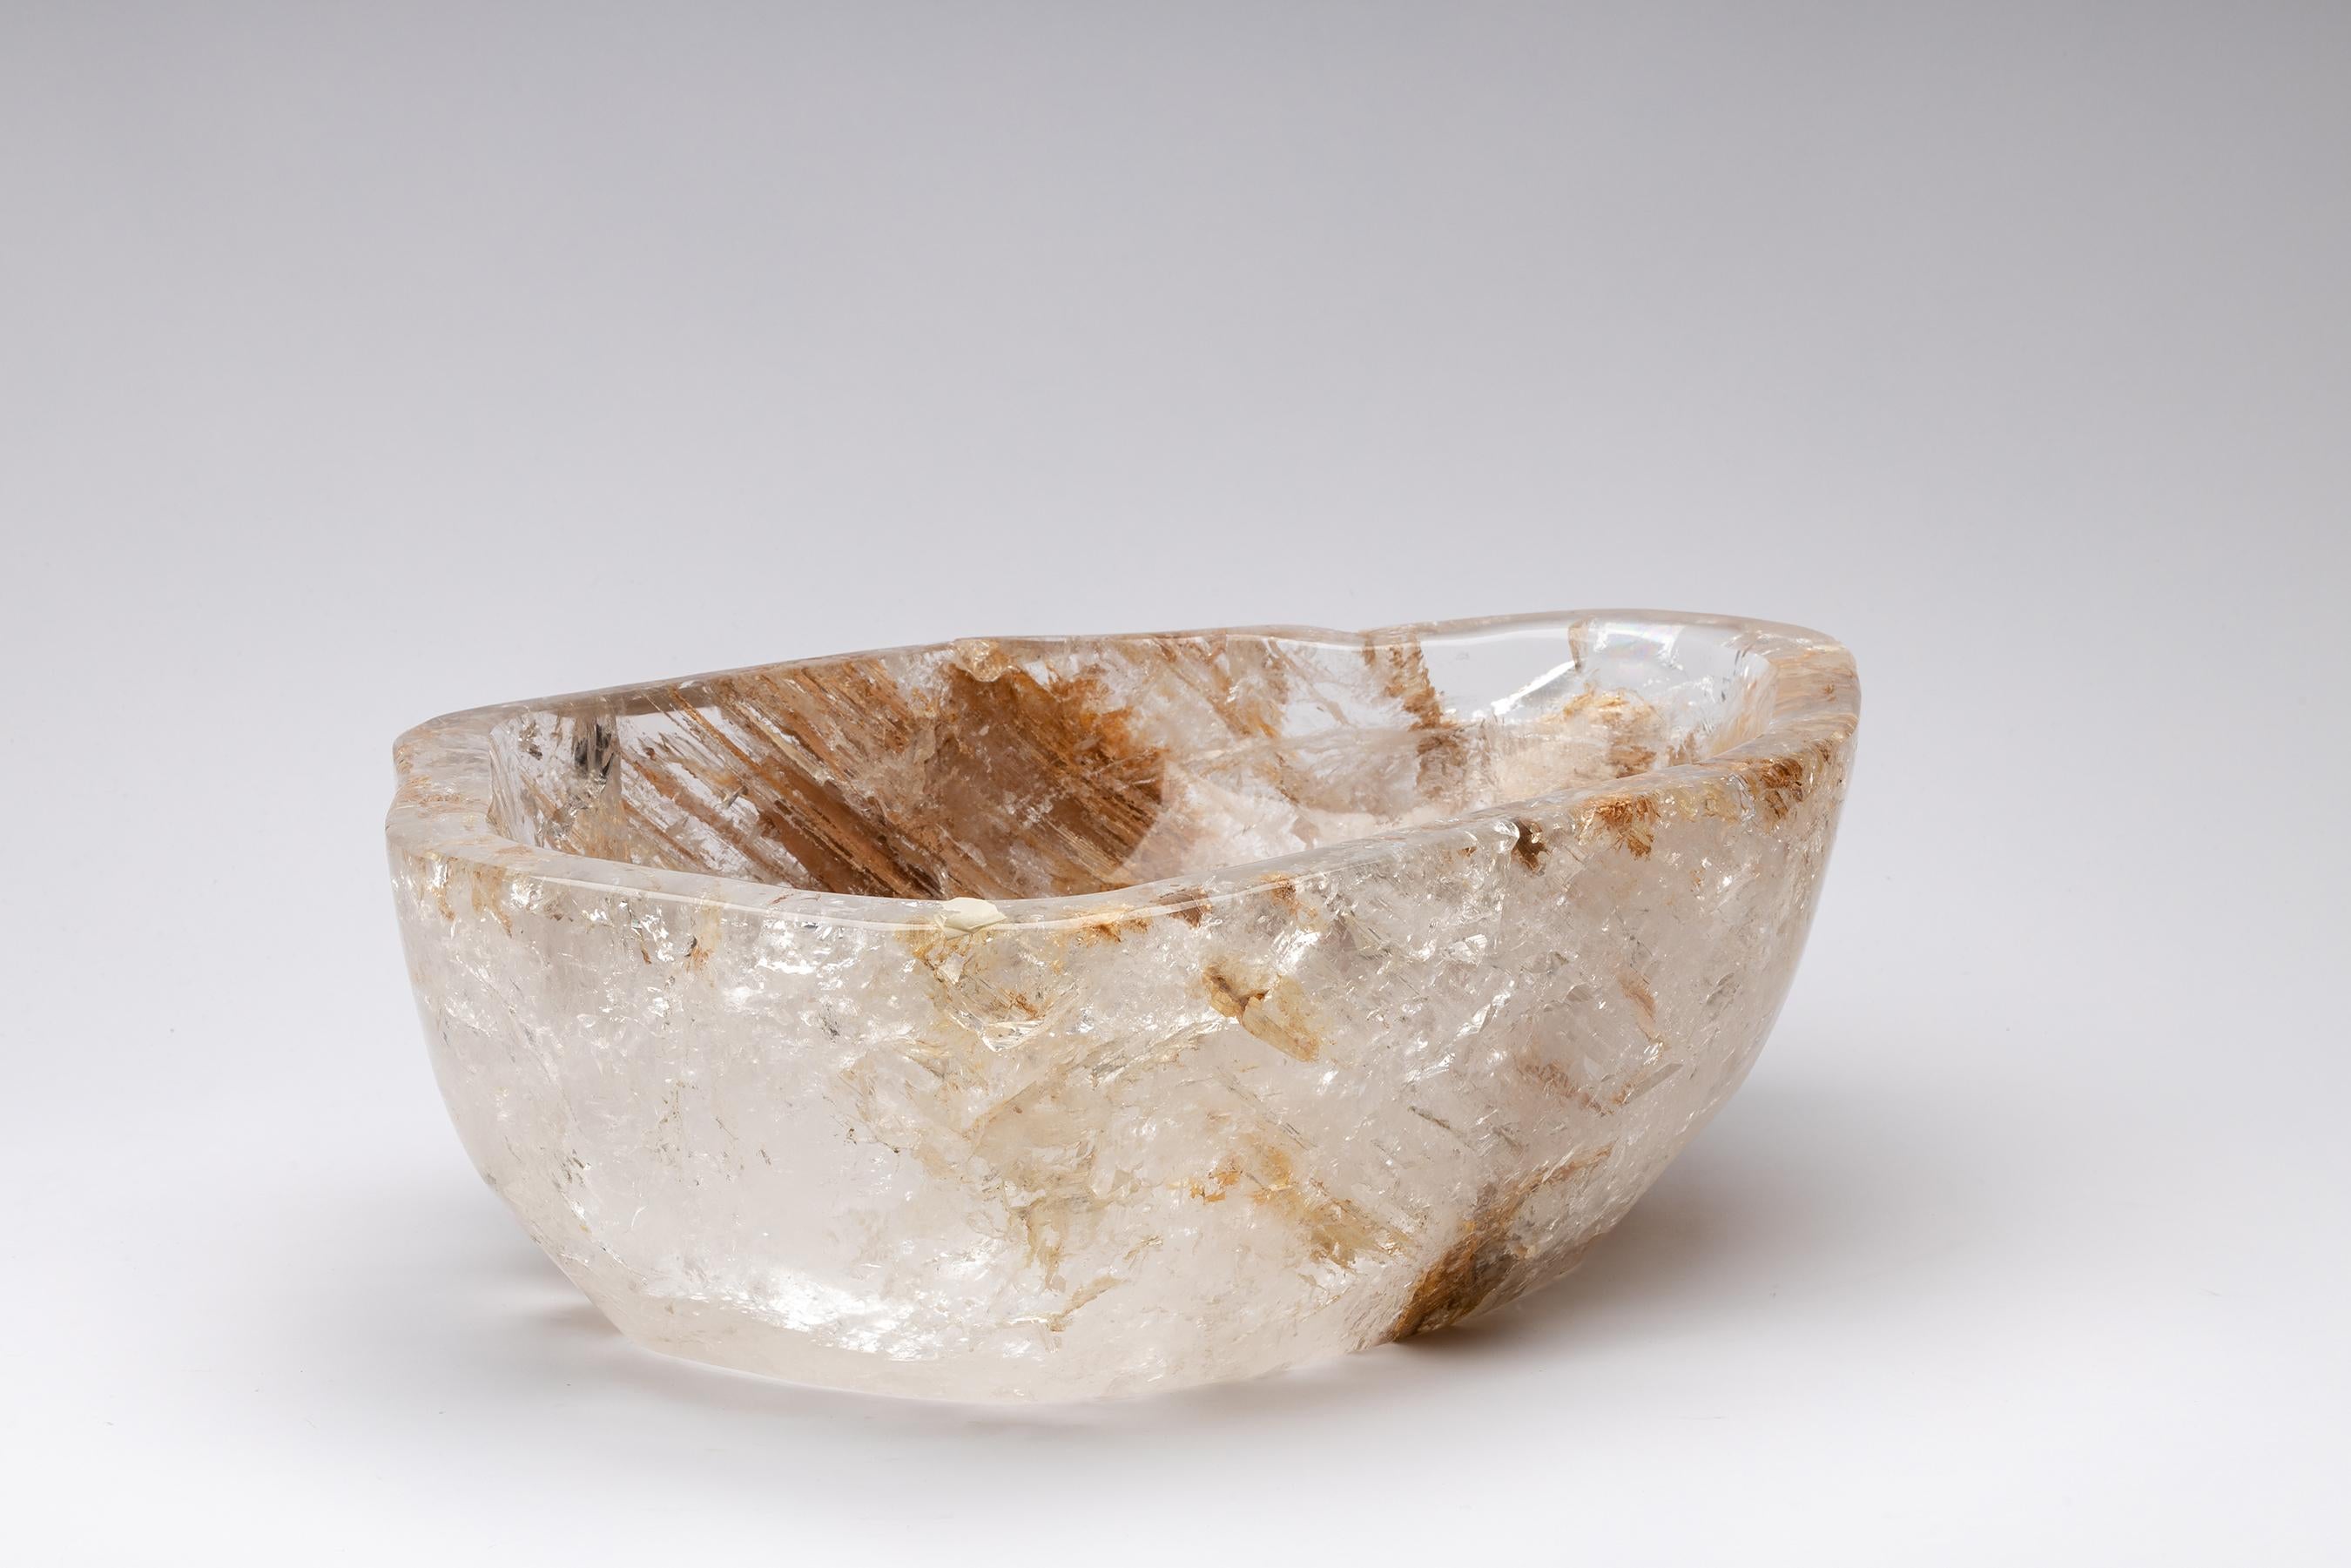 Mexican Large White Brazilian Quartz with Oxide Inclusions Bowl in Organic Shape